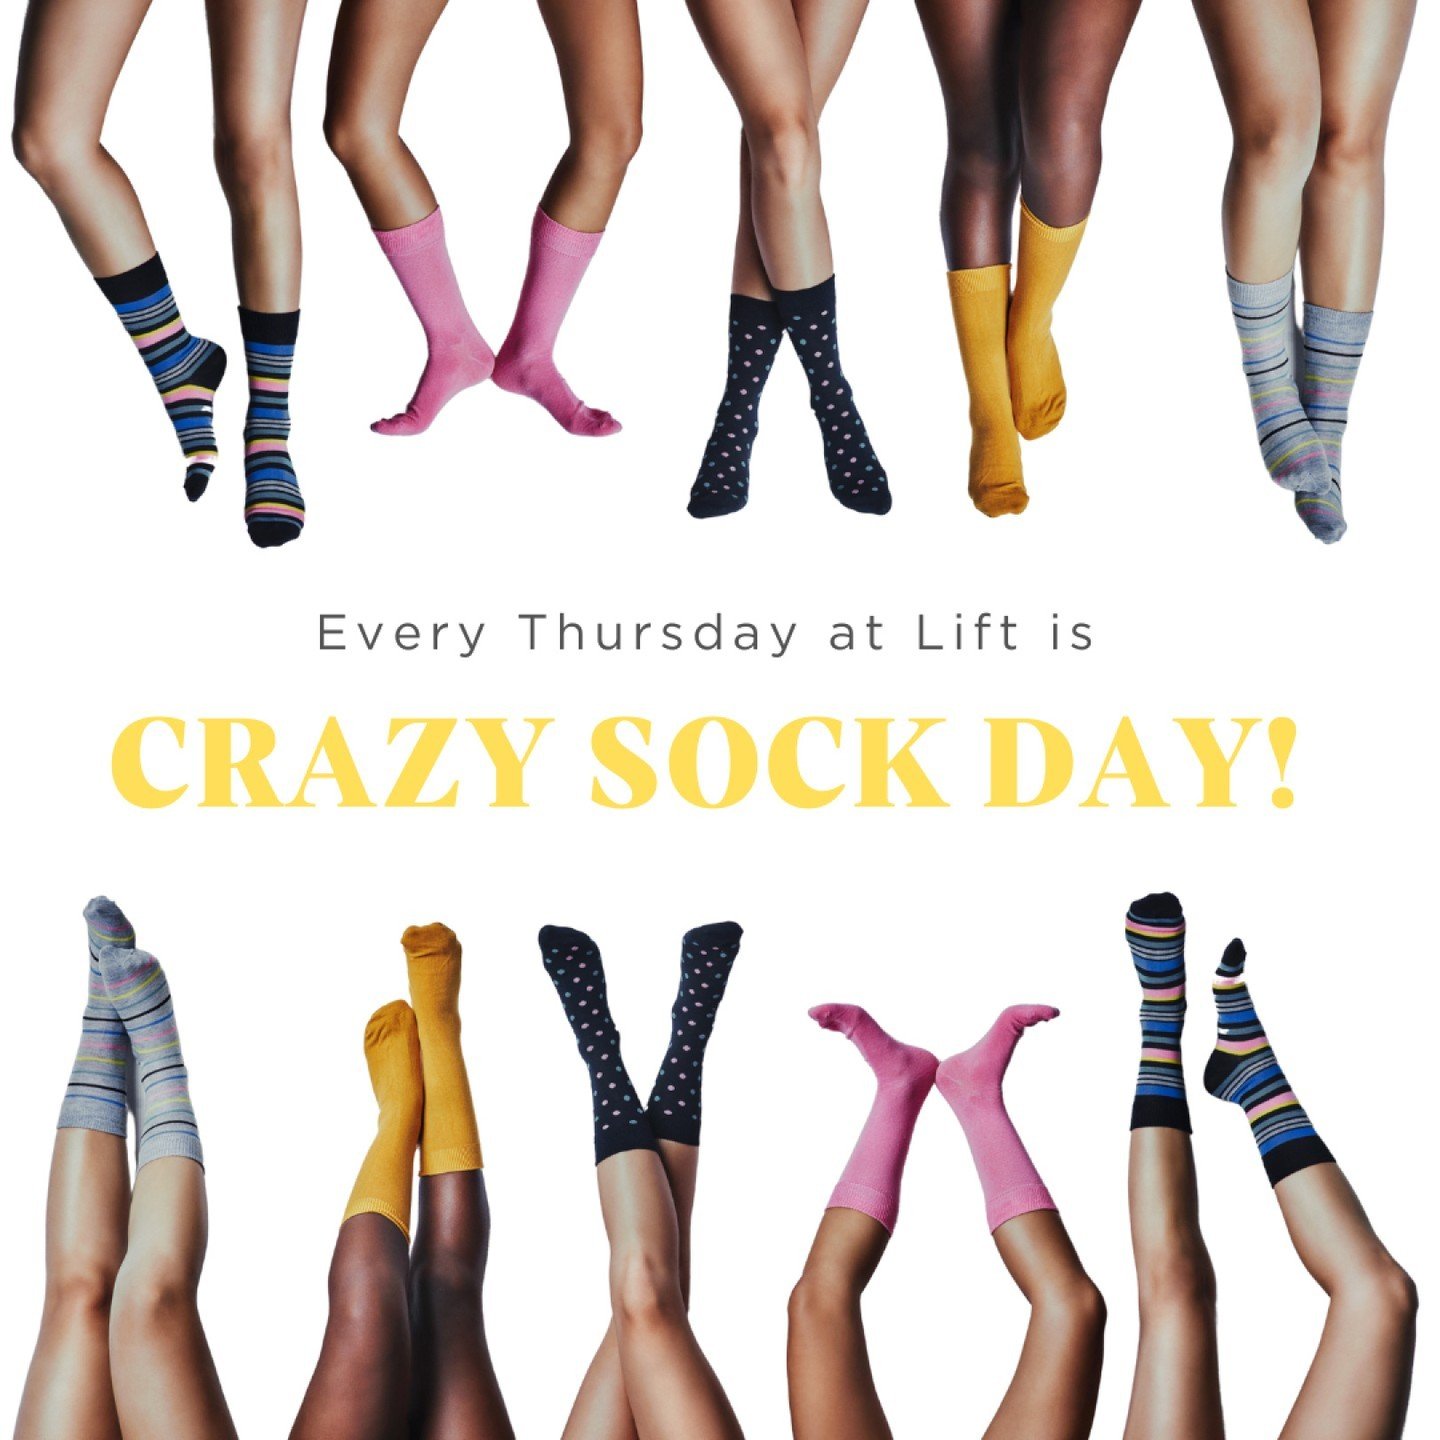 Did you know that every Thursday at Lift is Crazy Sock Day!

Join in on the fun by donning your craziest pair, and bringing a little extra colour and joy tomorrow, and every Thursday 🧦